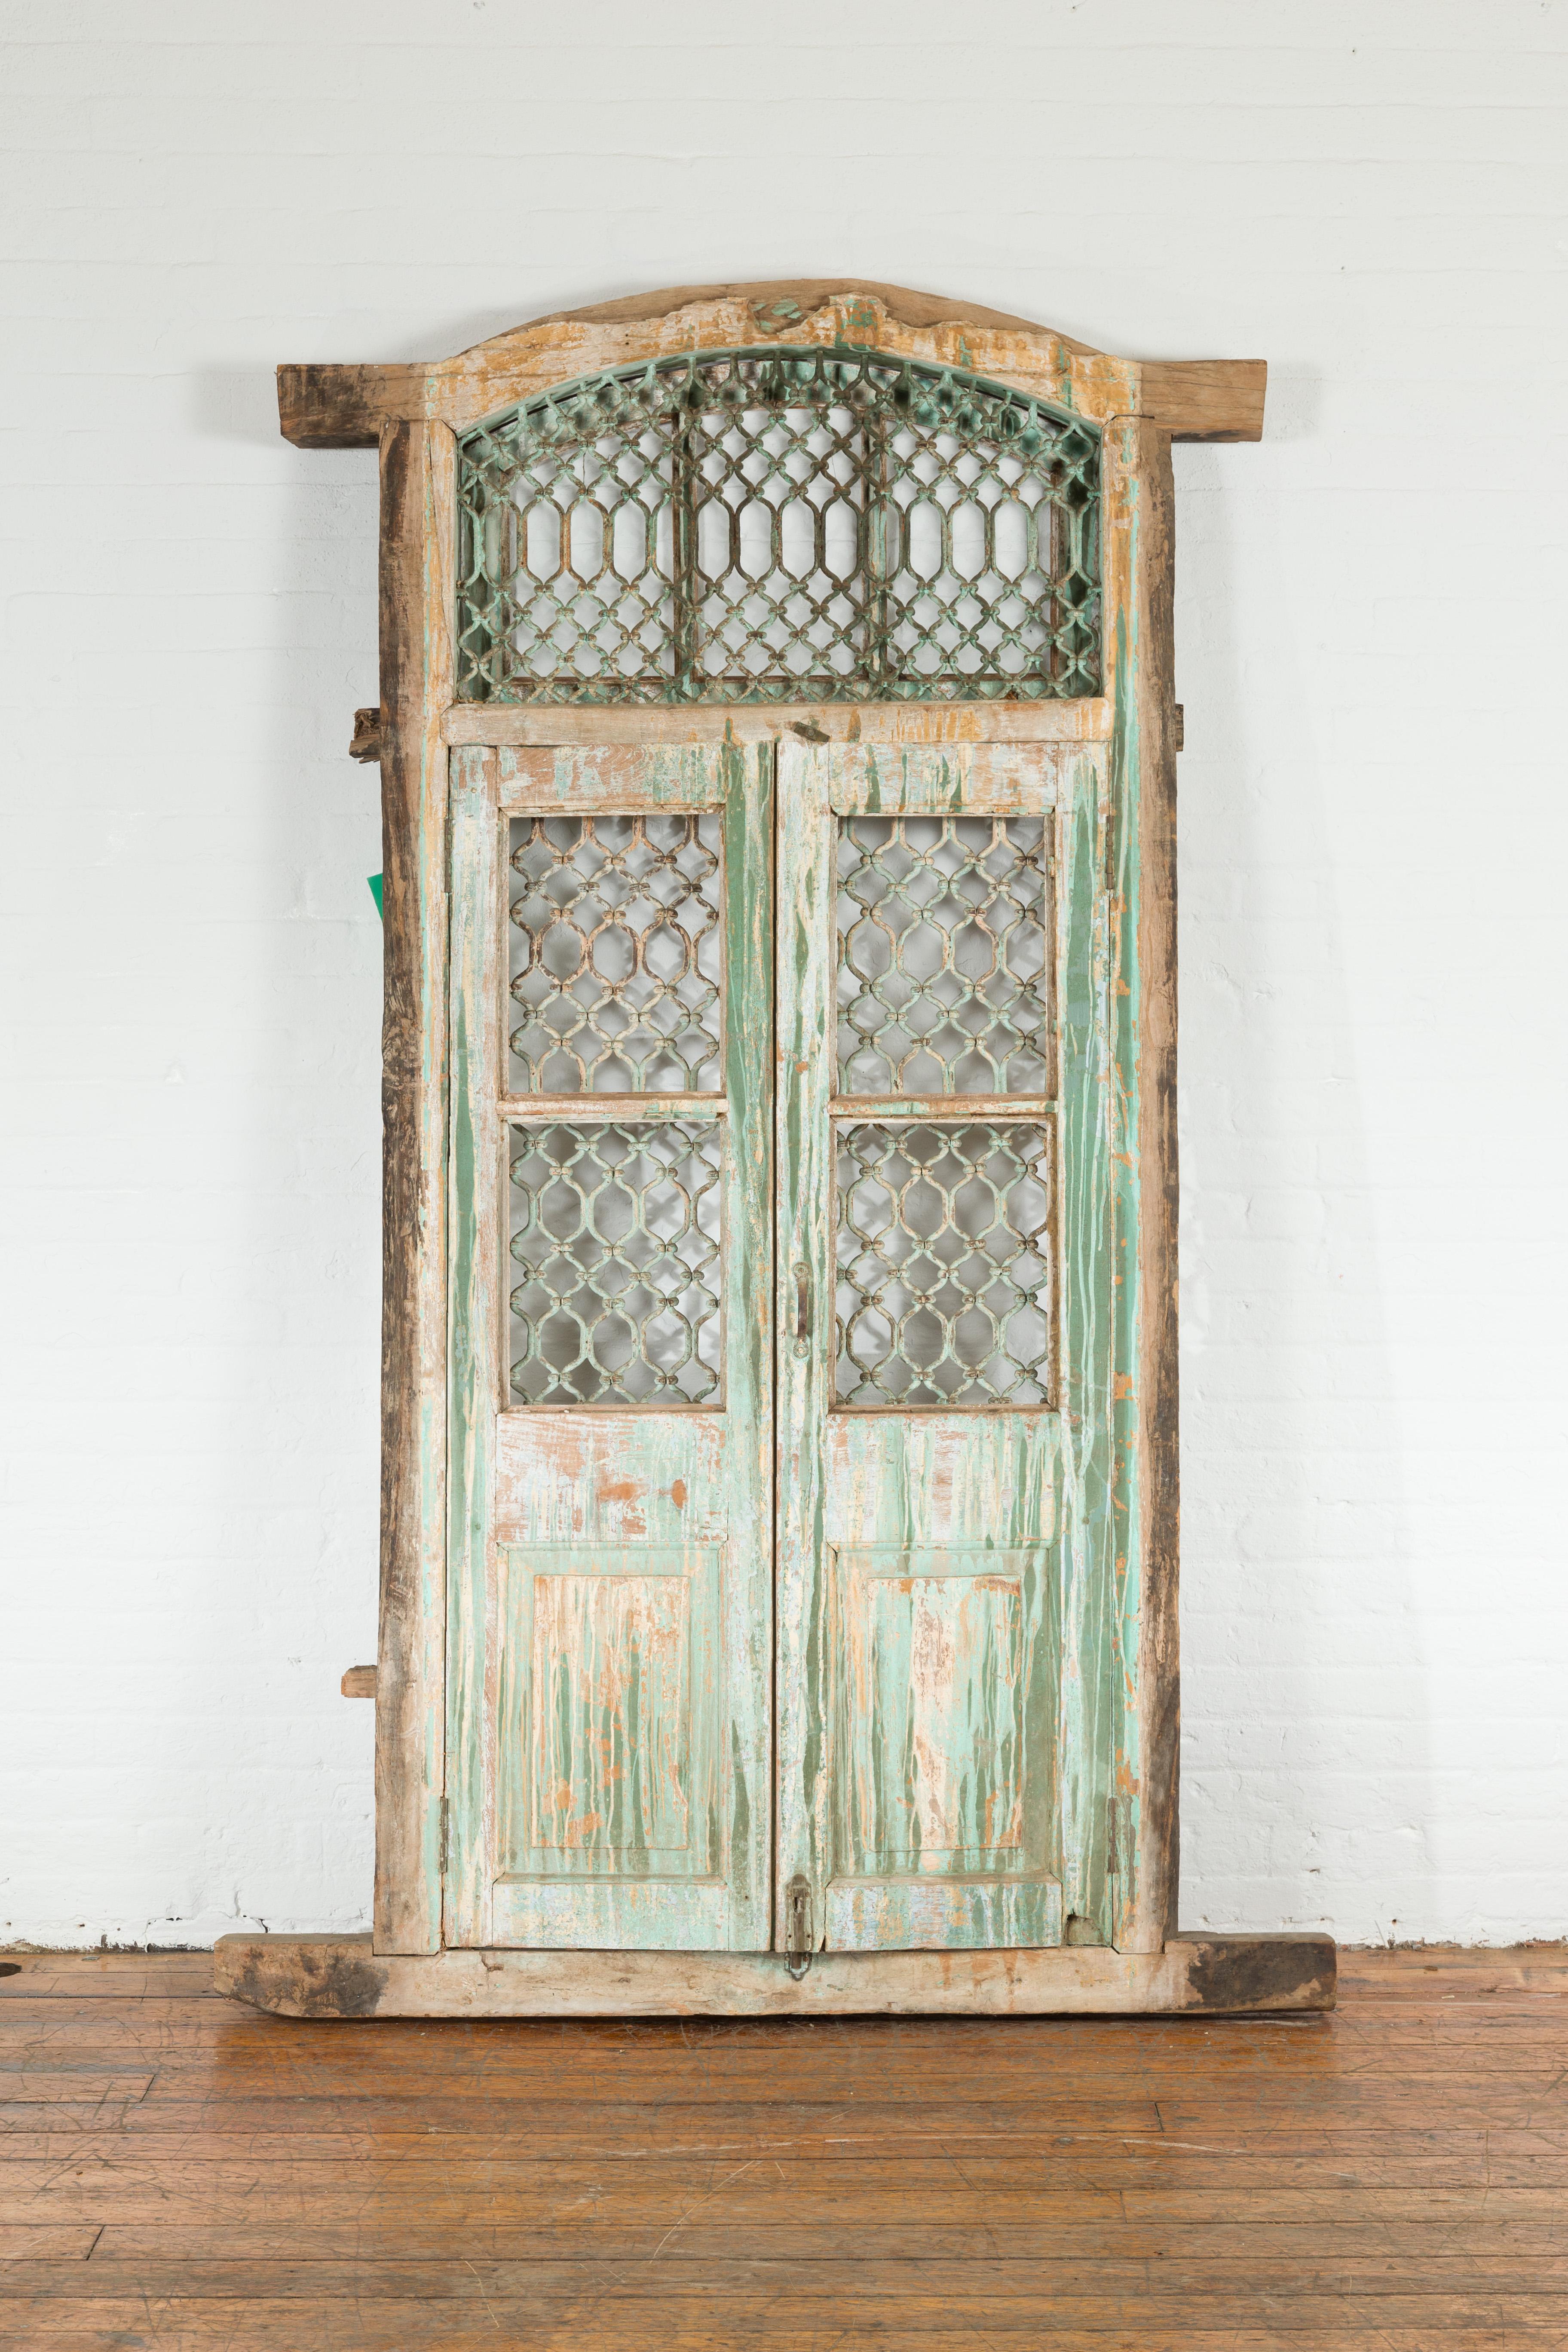 An Indian antique iron grate window from the early 20th century, with green paint and distressed patina. Created in India during the early years of the 20th century, this antique tall window features a nicely distressed wooden structure surrounding